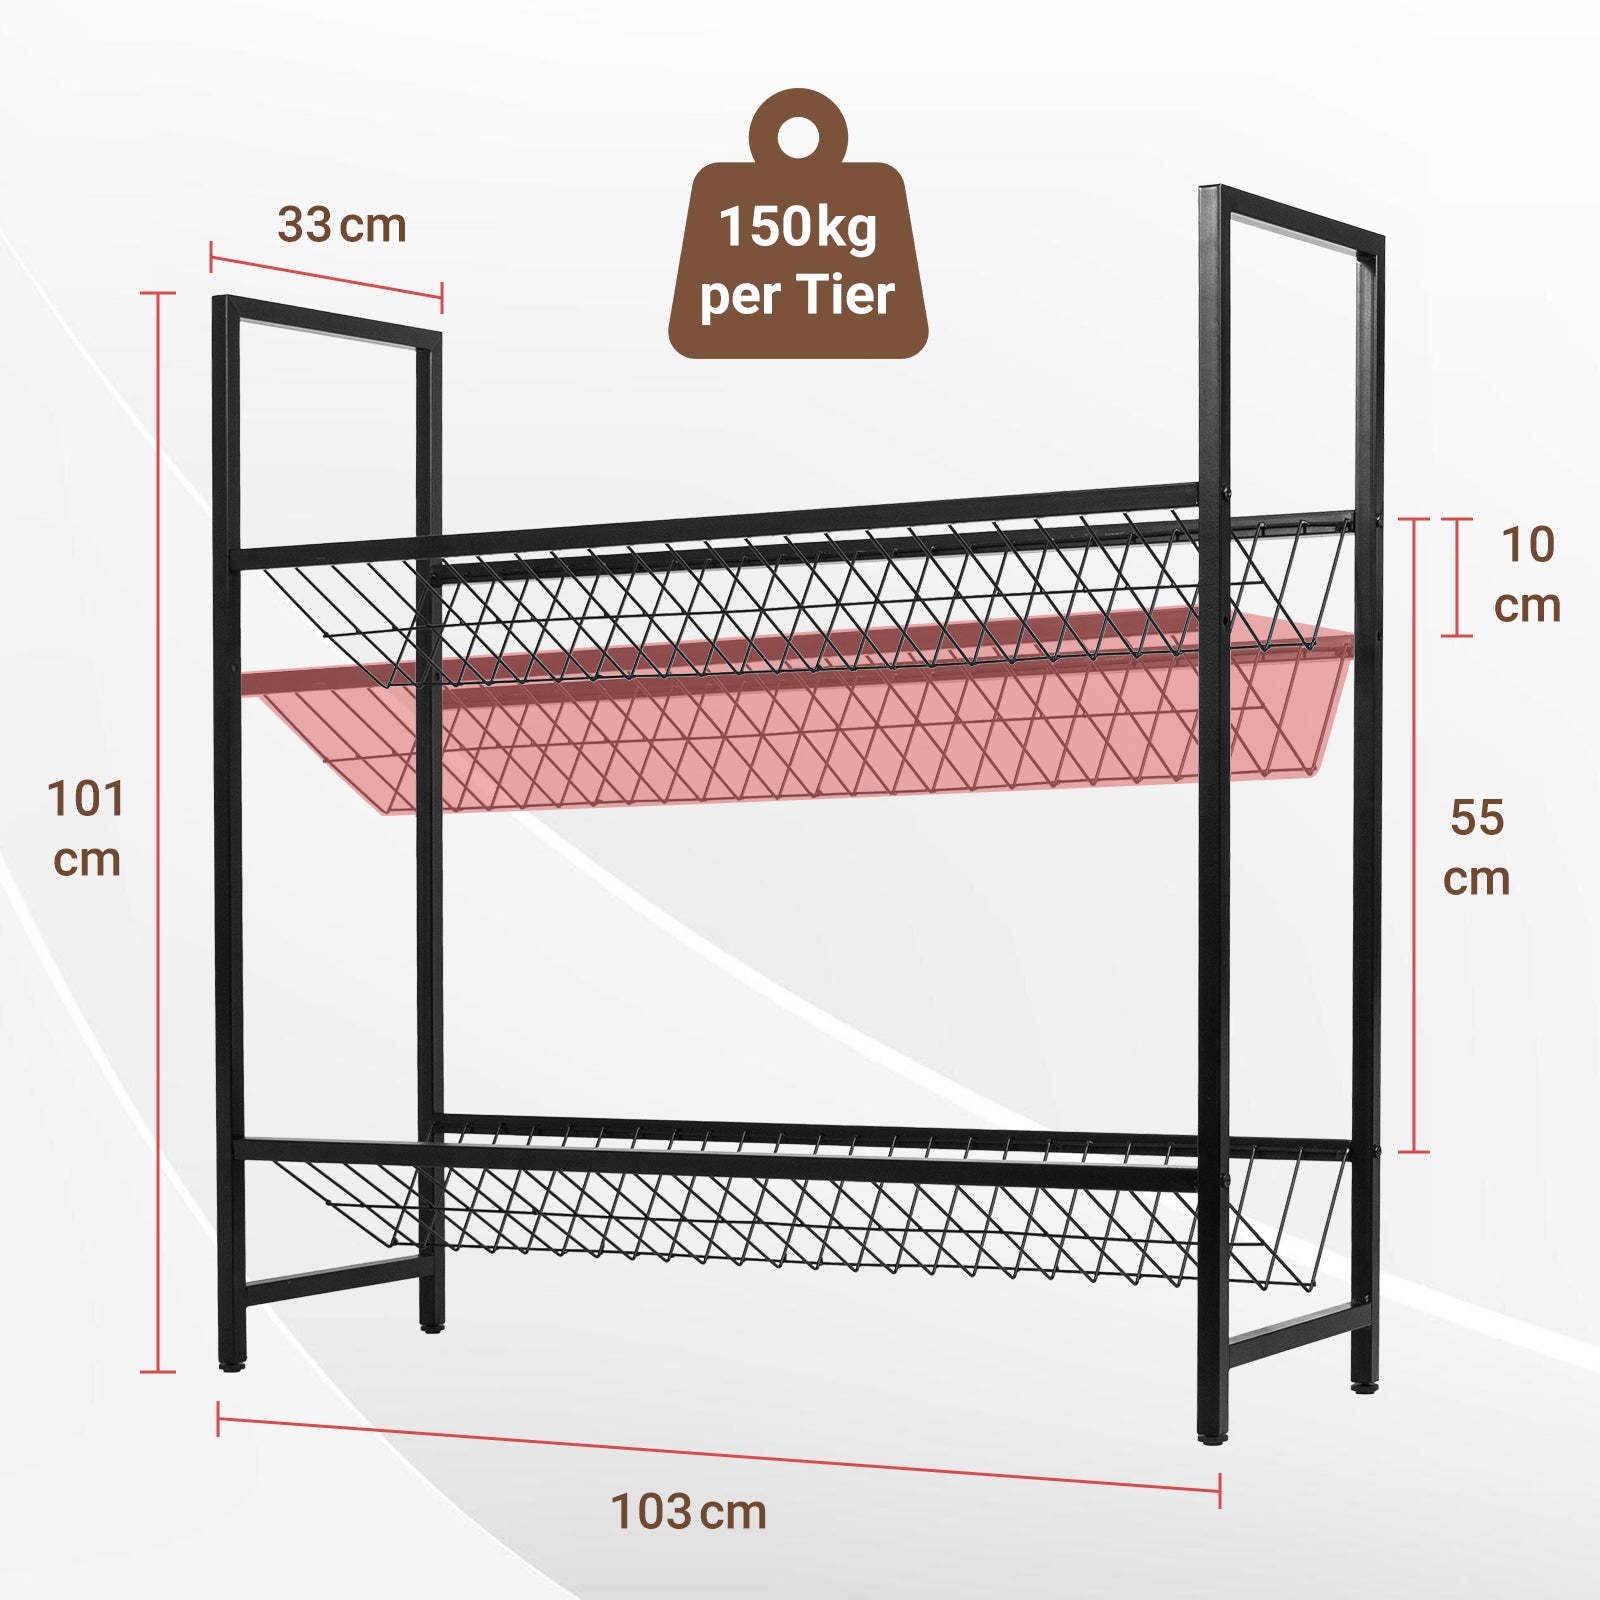 Beverage-Shelf-with-Wire-Mesh-Support-Height-Adjustable-Beverage-Crate-Holder-for-6-8-Crates-Beverage-Crate-Shelf-with-Adjustable-Feet-Beverage-Shelf